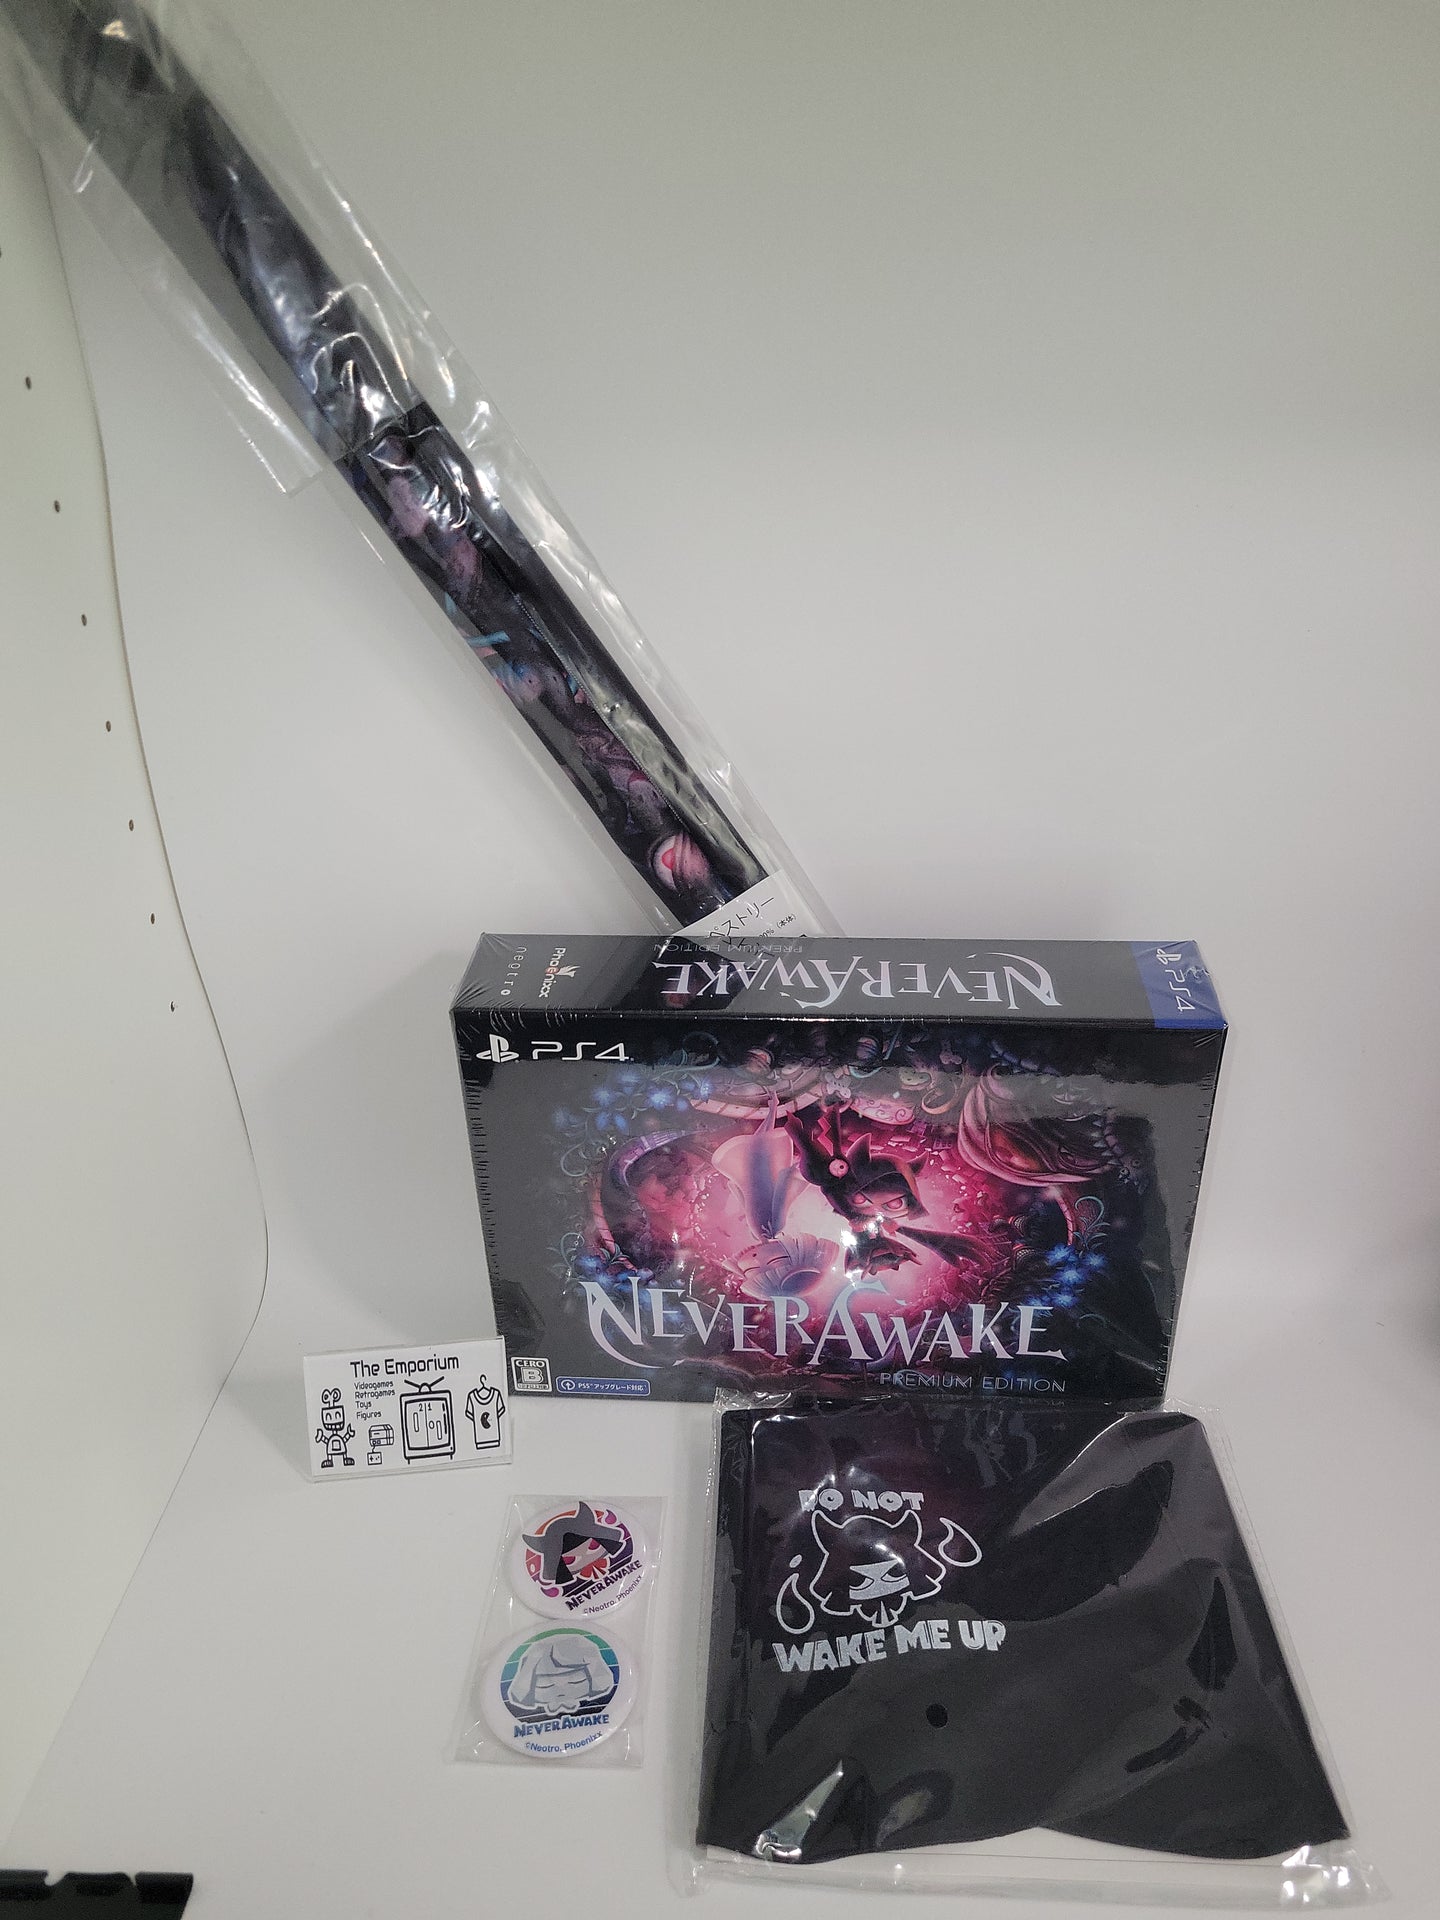 NeverAwake  Limited Edition Deluxe - Sony PS4 Playstation 4